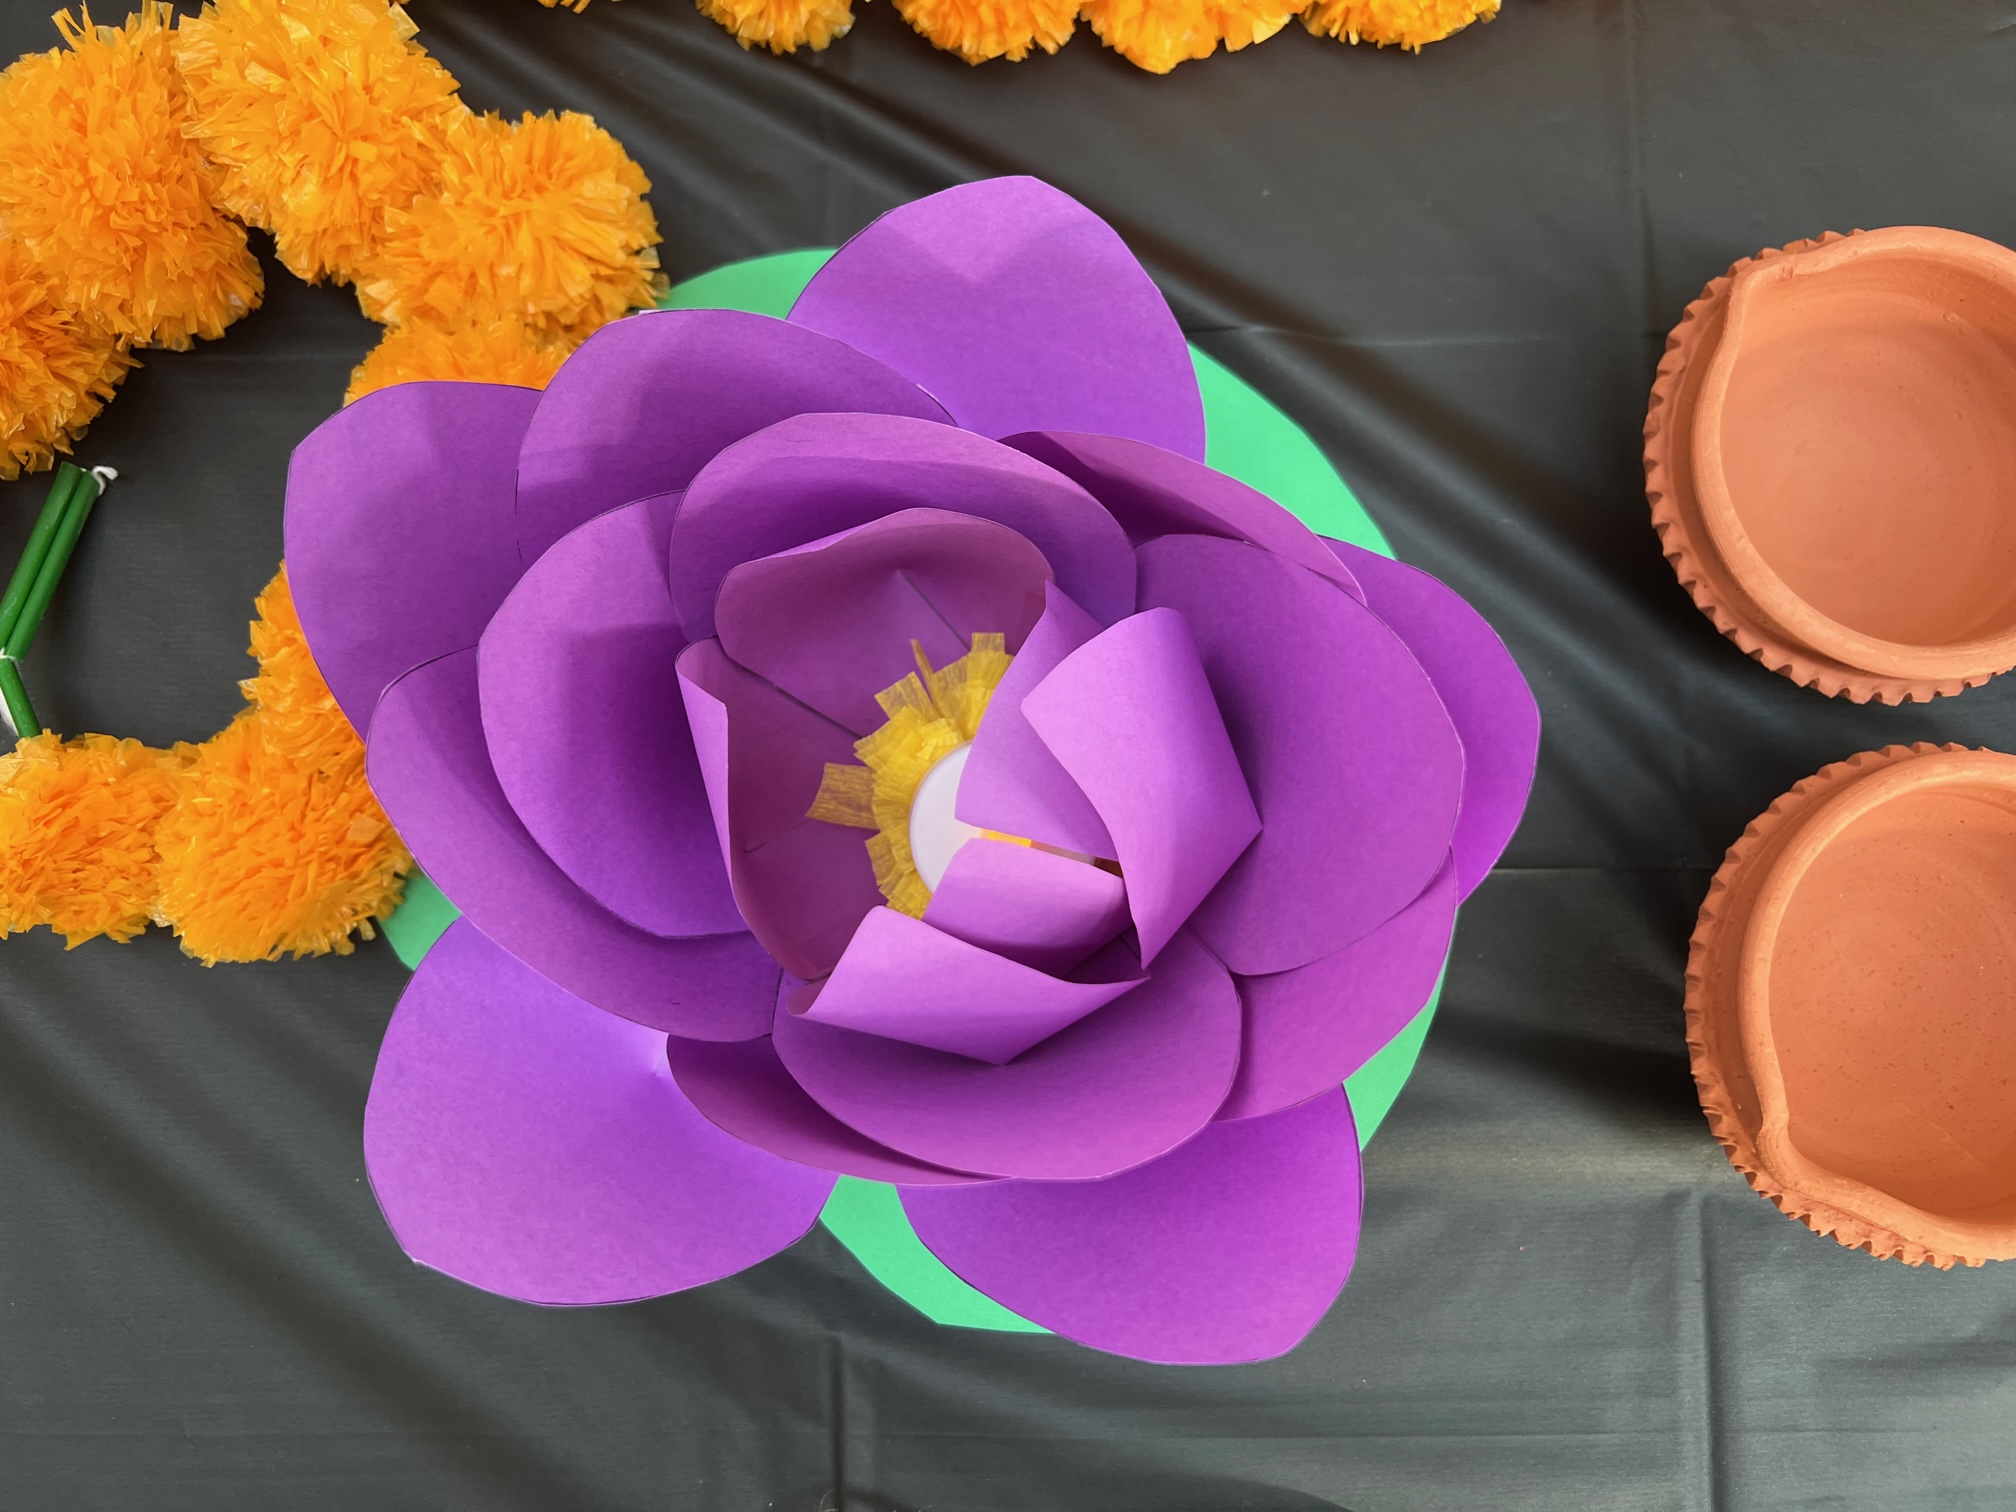 At the India table, there is a purple paper flower. Photo by Alyssa Buckley.